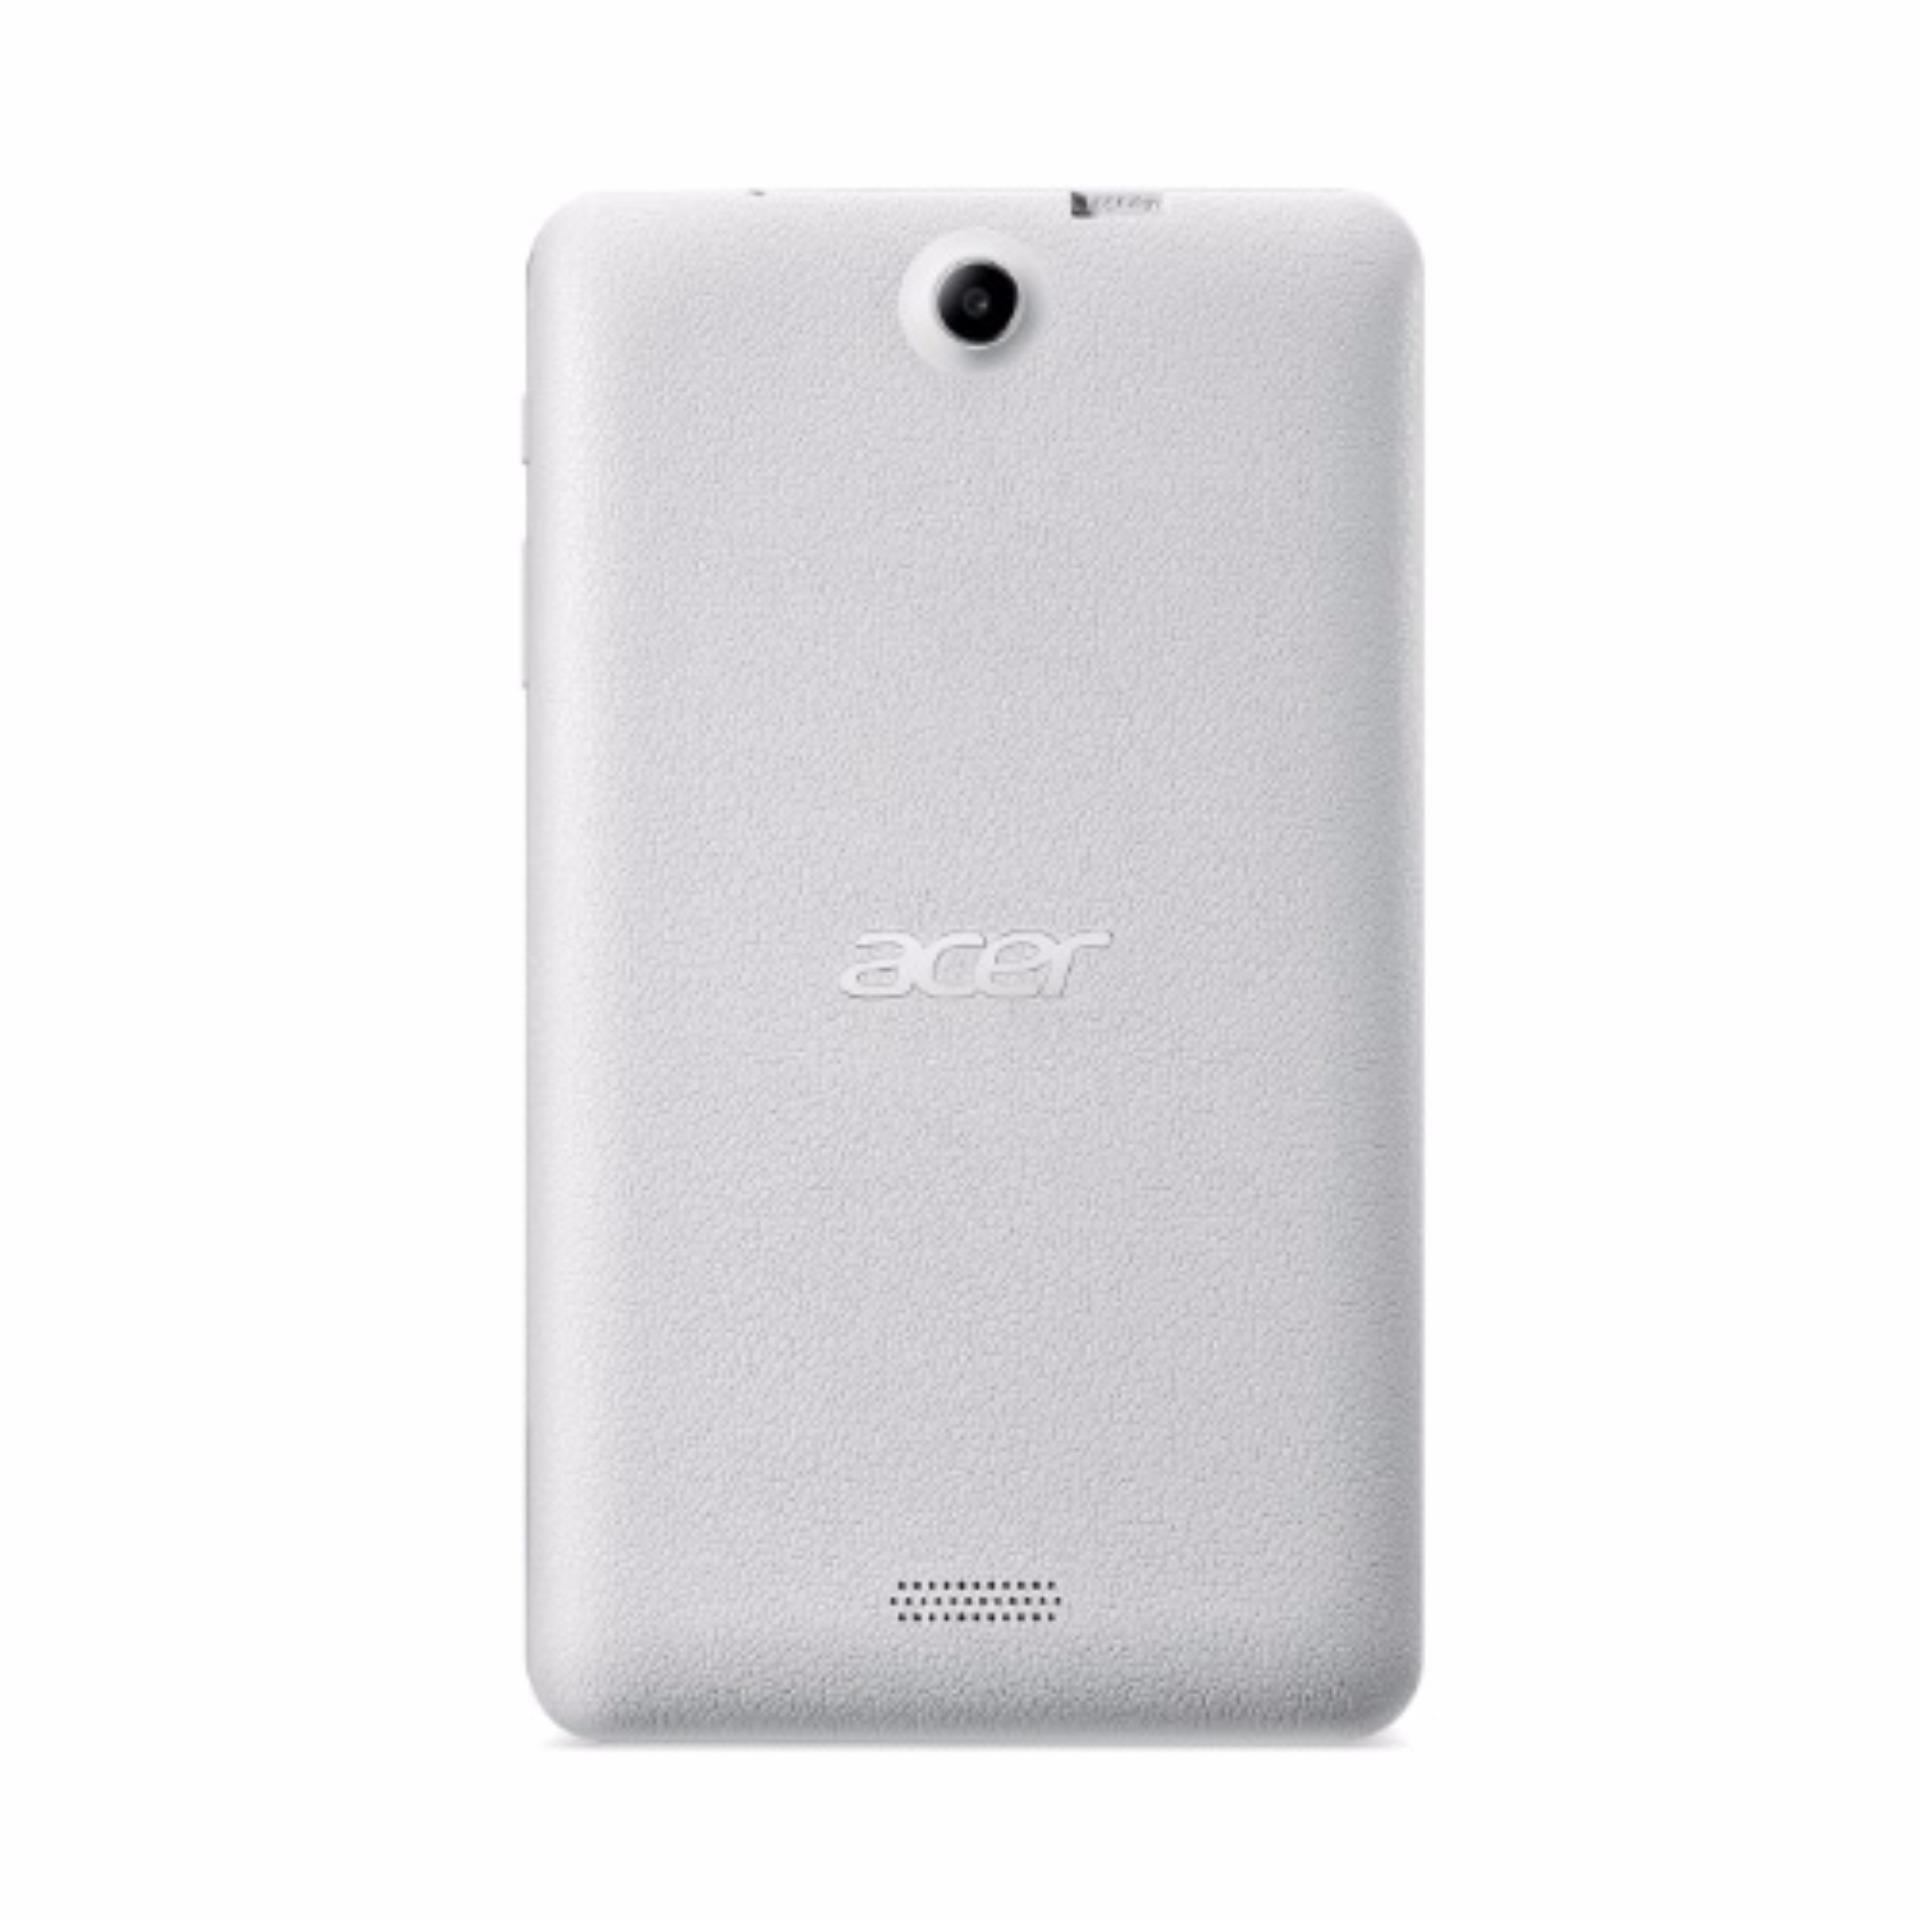 Acer Iconia One 7 B1-7A0-K8E4 WIFI Tablet with 16GB Storage